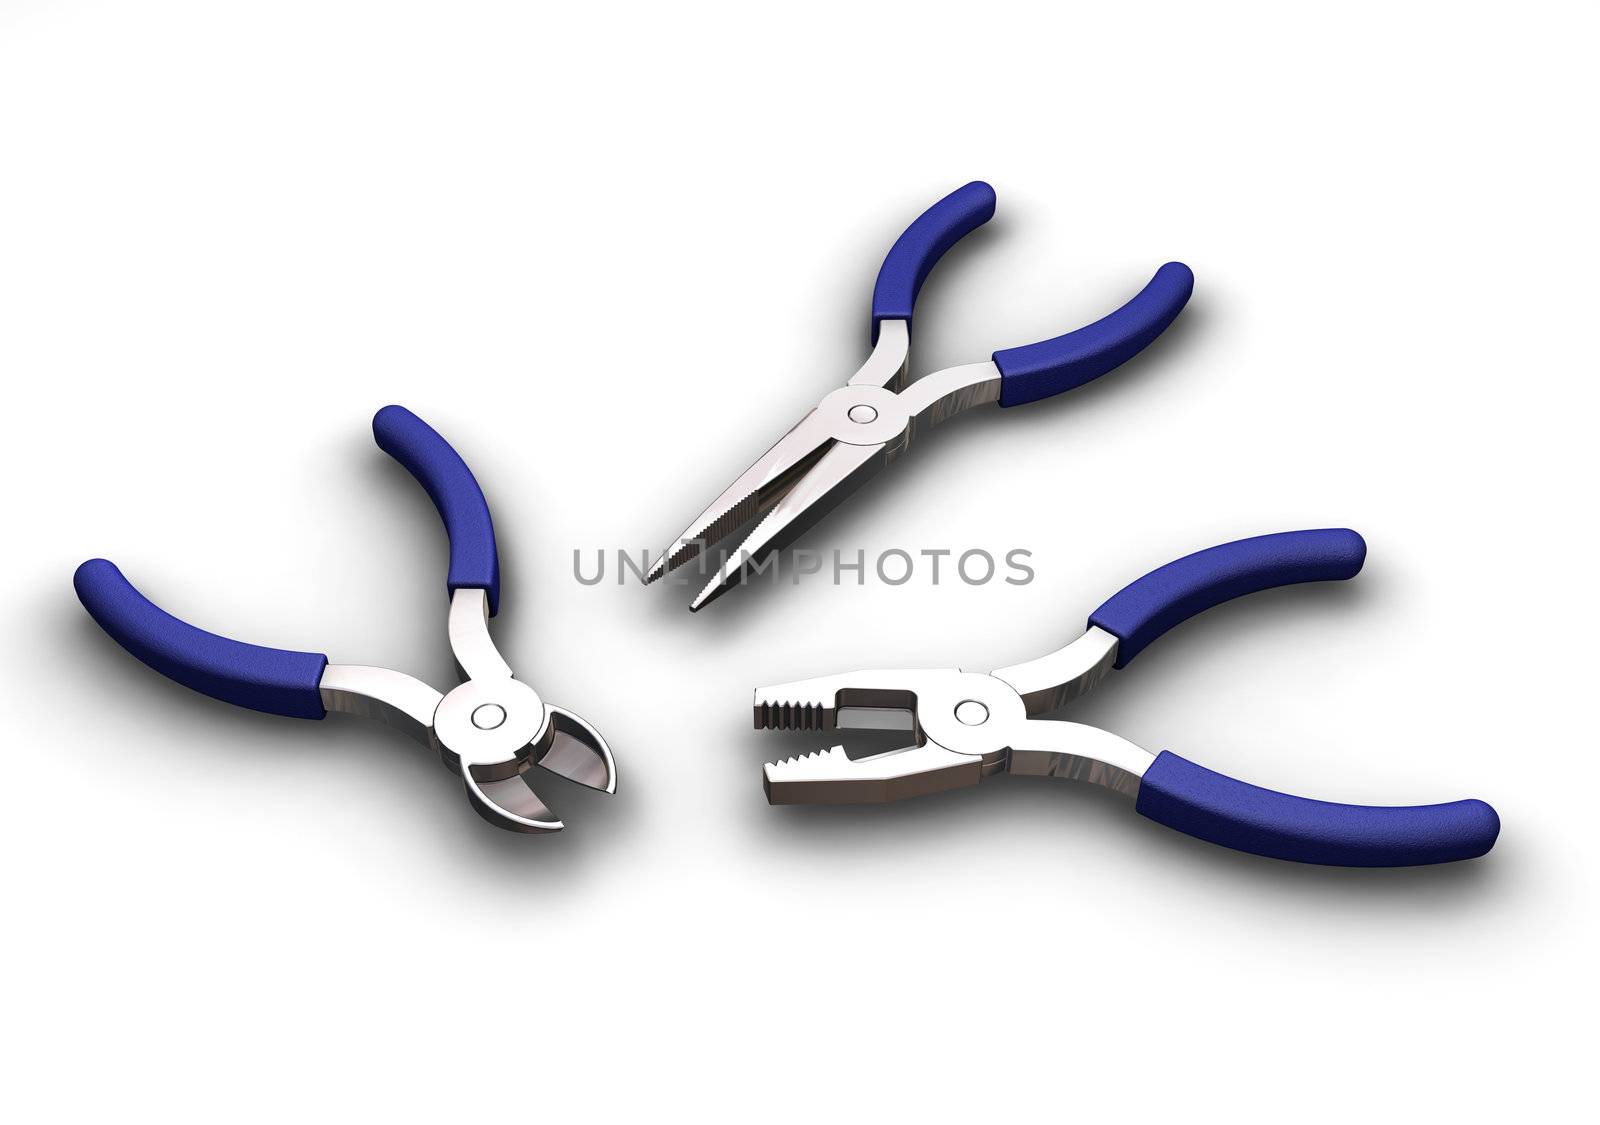 Pliers and cutters by kjpargeter